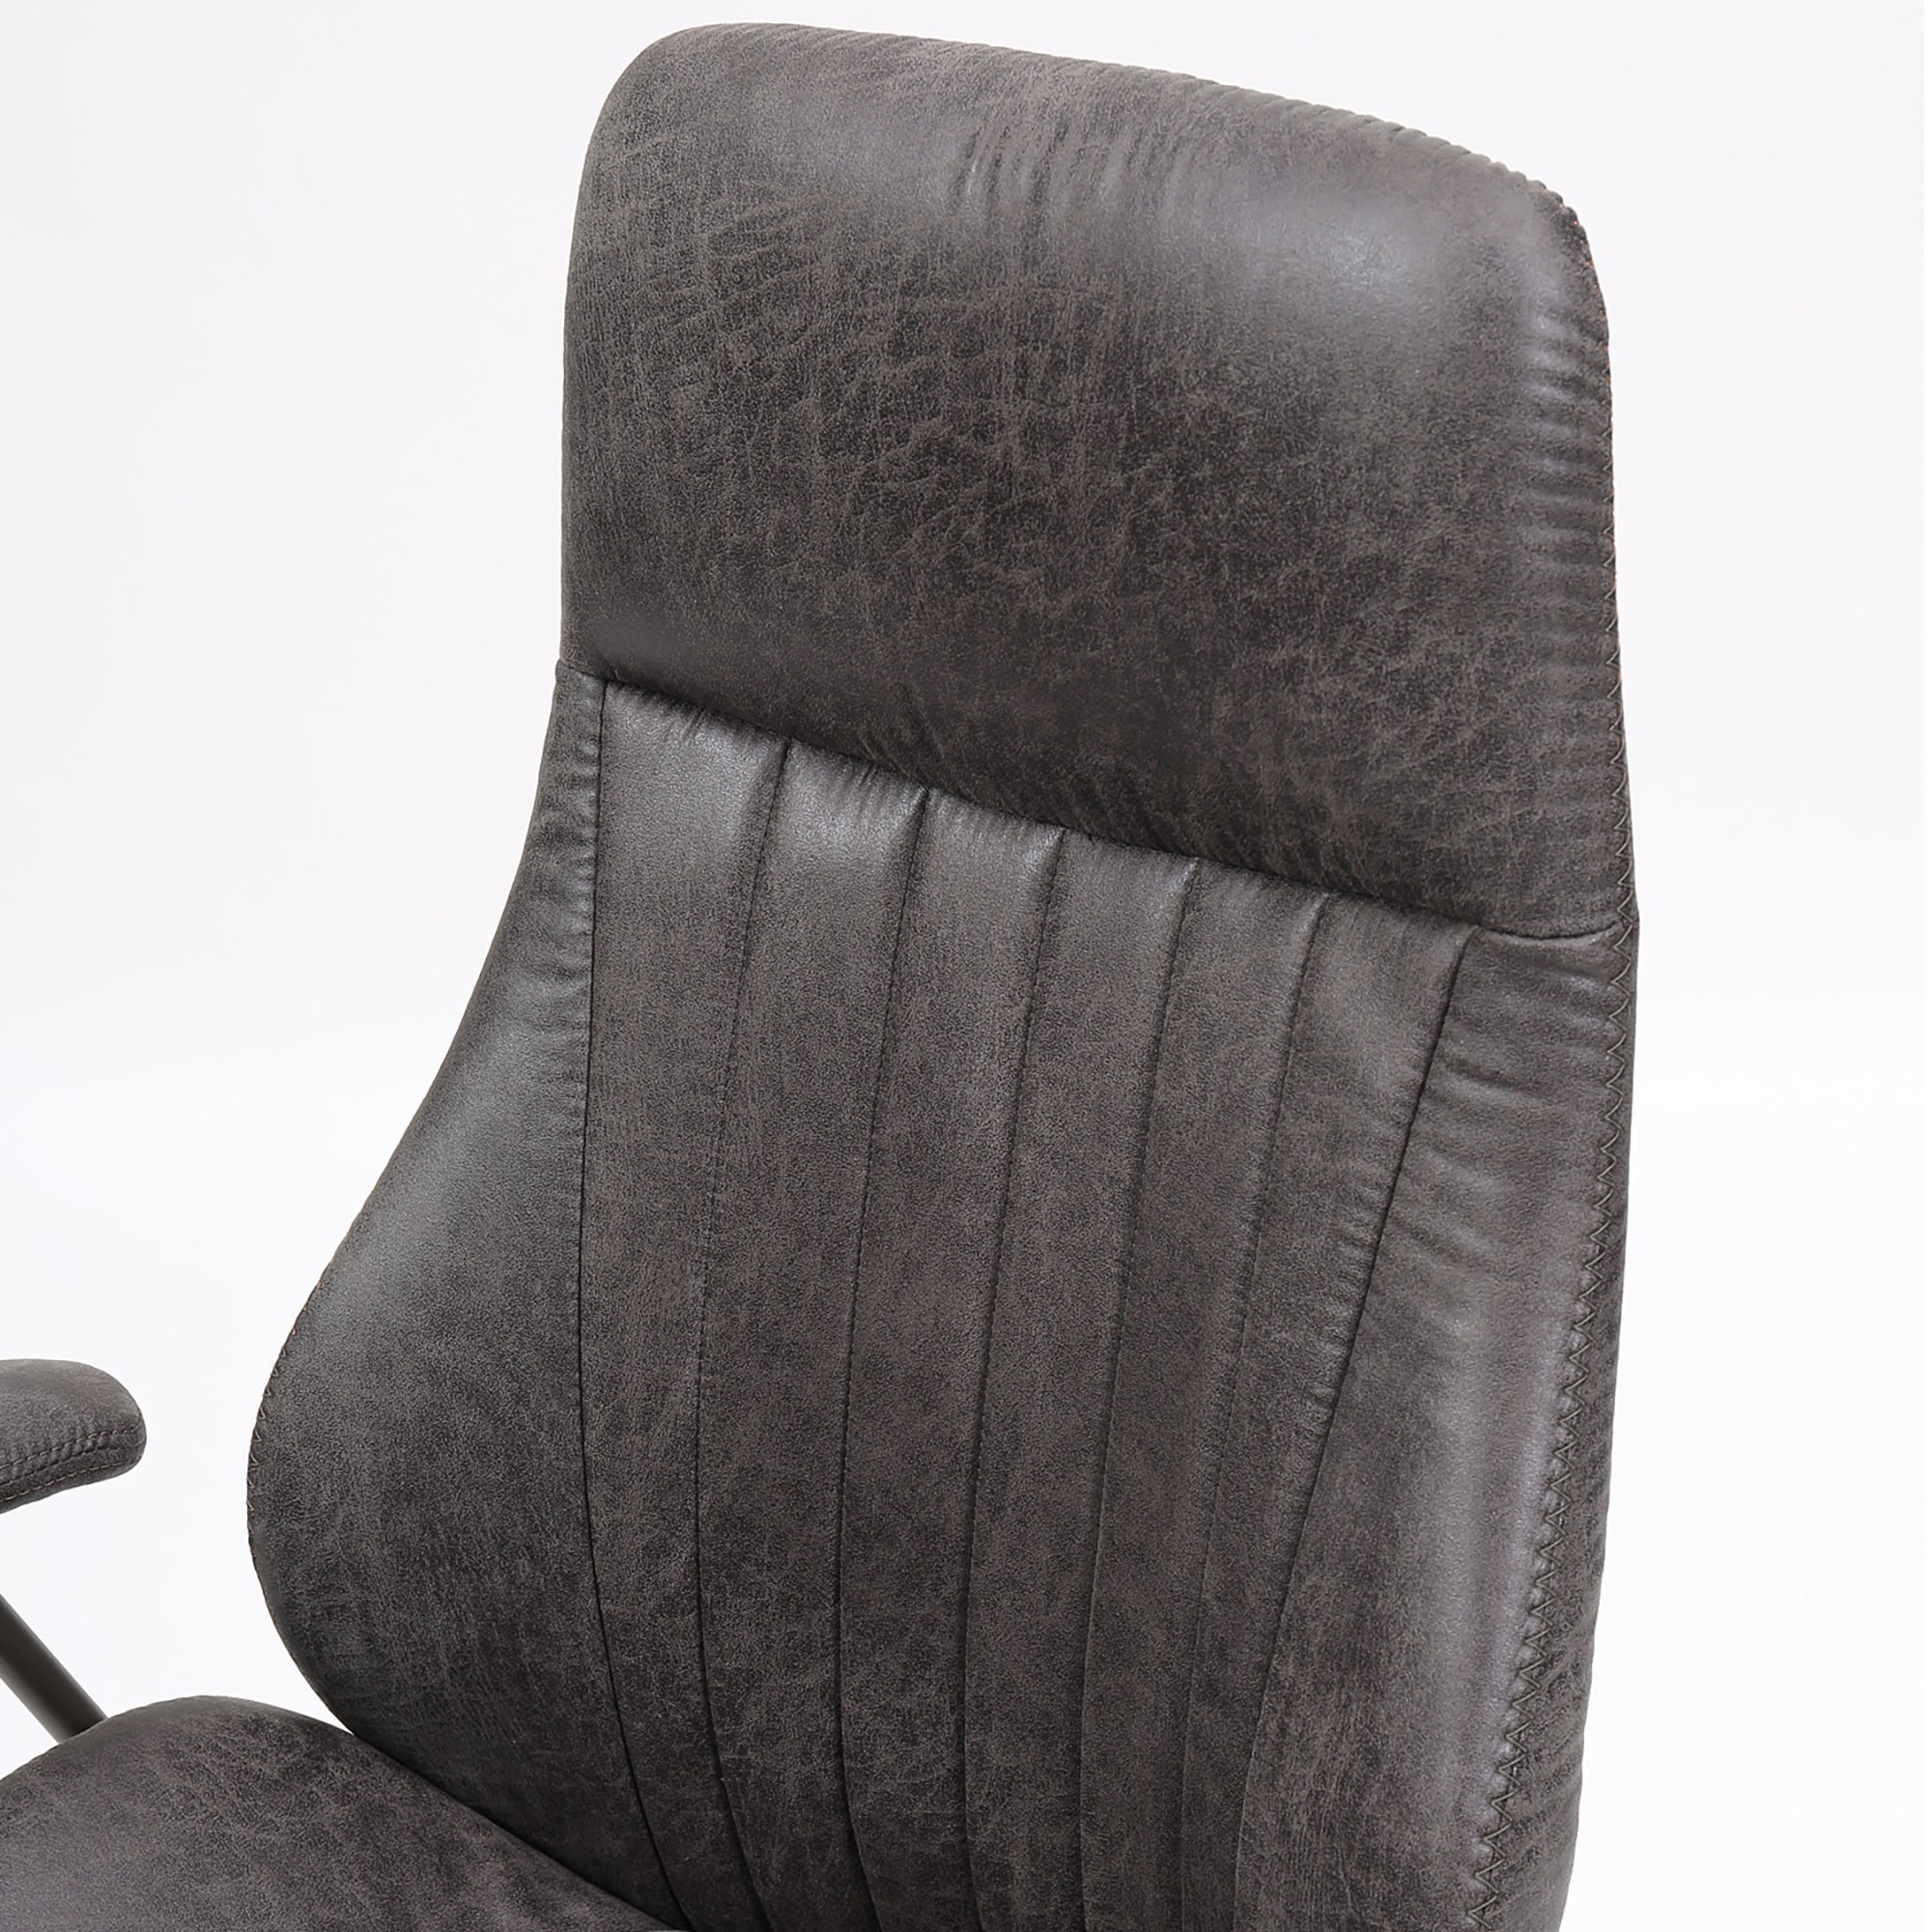 https://ak1.ostkcdn.com/images/products/is/images/direct/8537bb7452ddbf1de5c6ade79540c991dd633c4c/OVIOS-Suede-Fabric-Ergonomic-Office-Chair-High-Back-Lumbar-Support.jpg